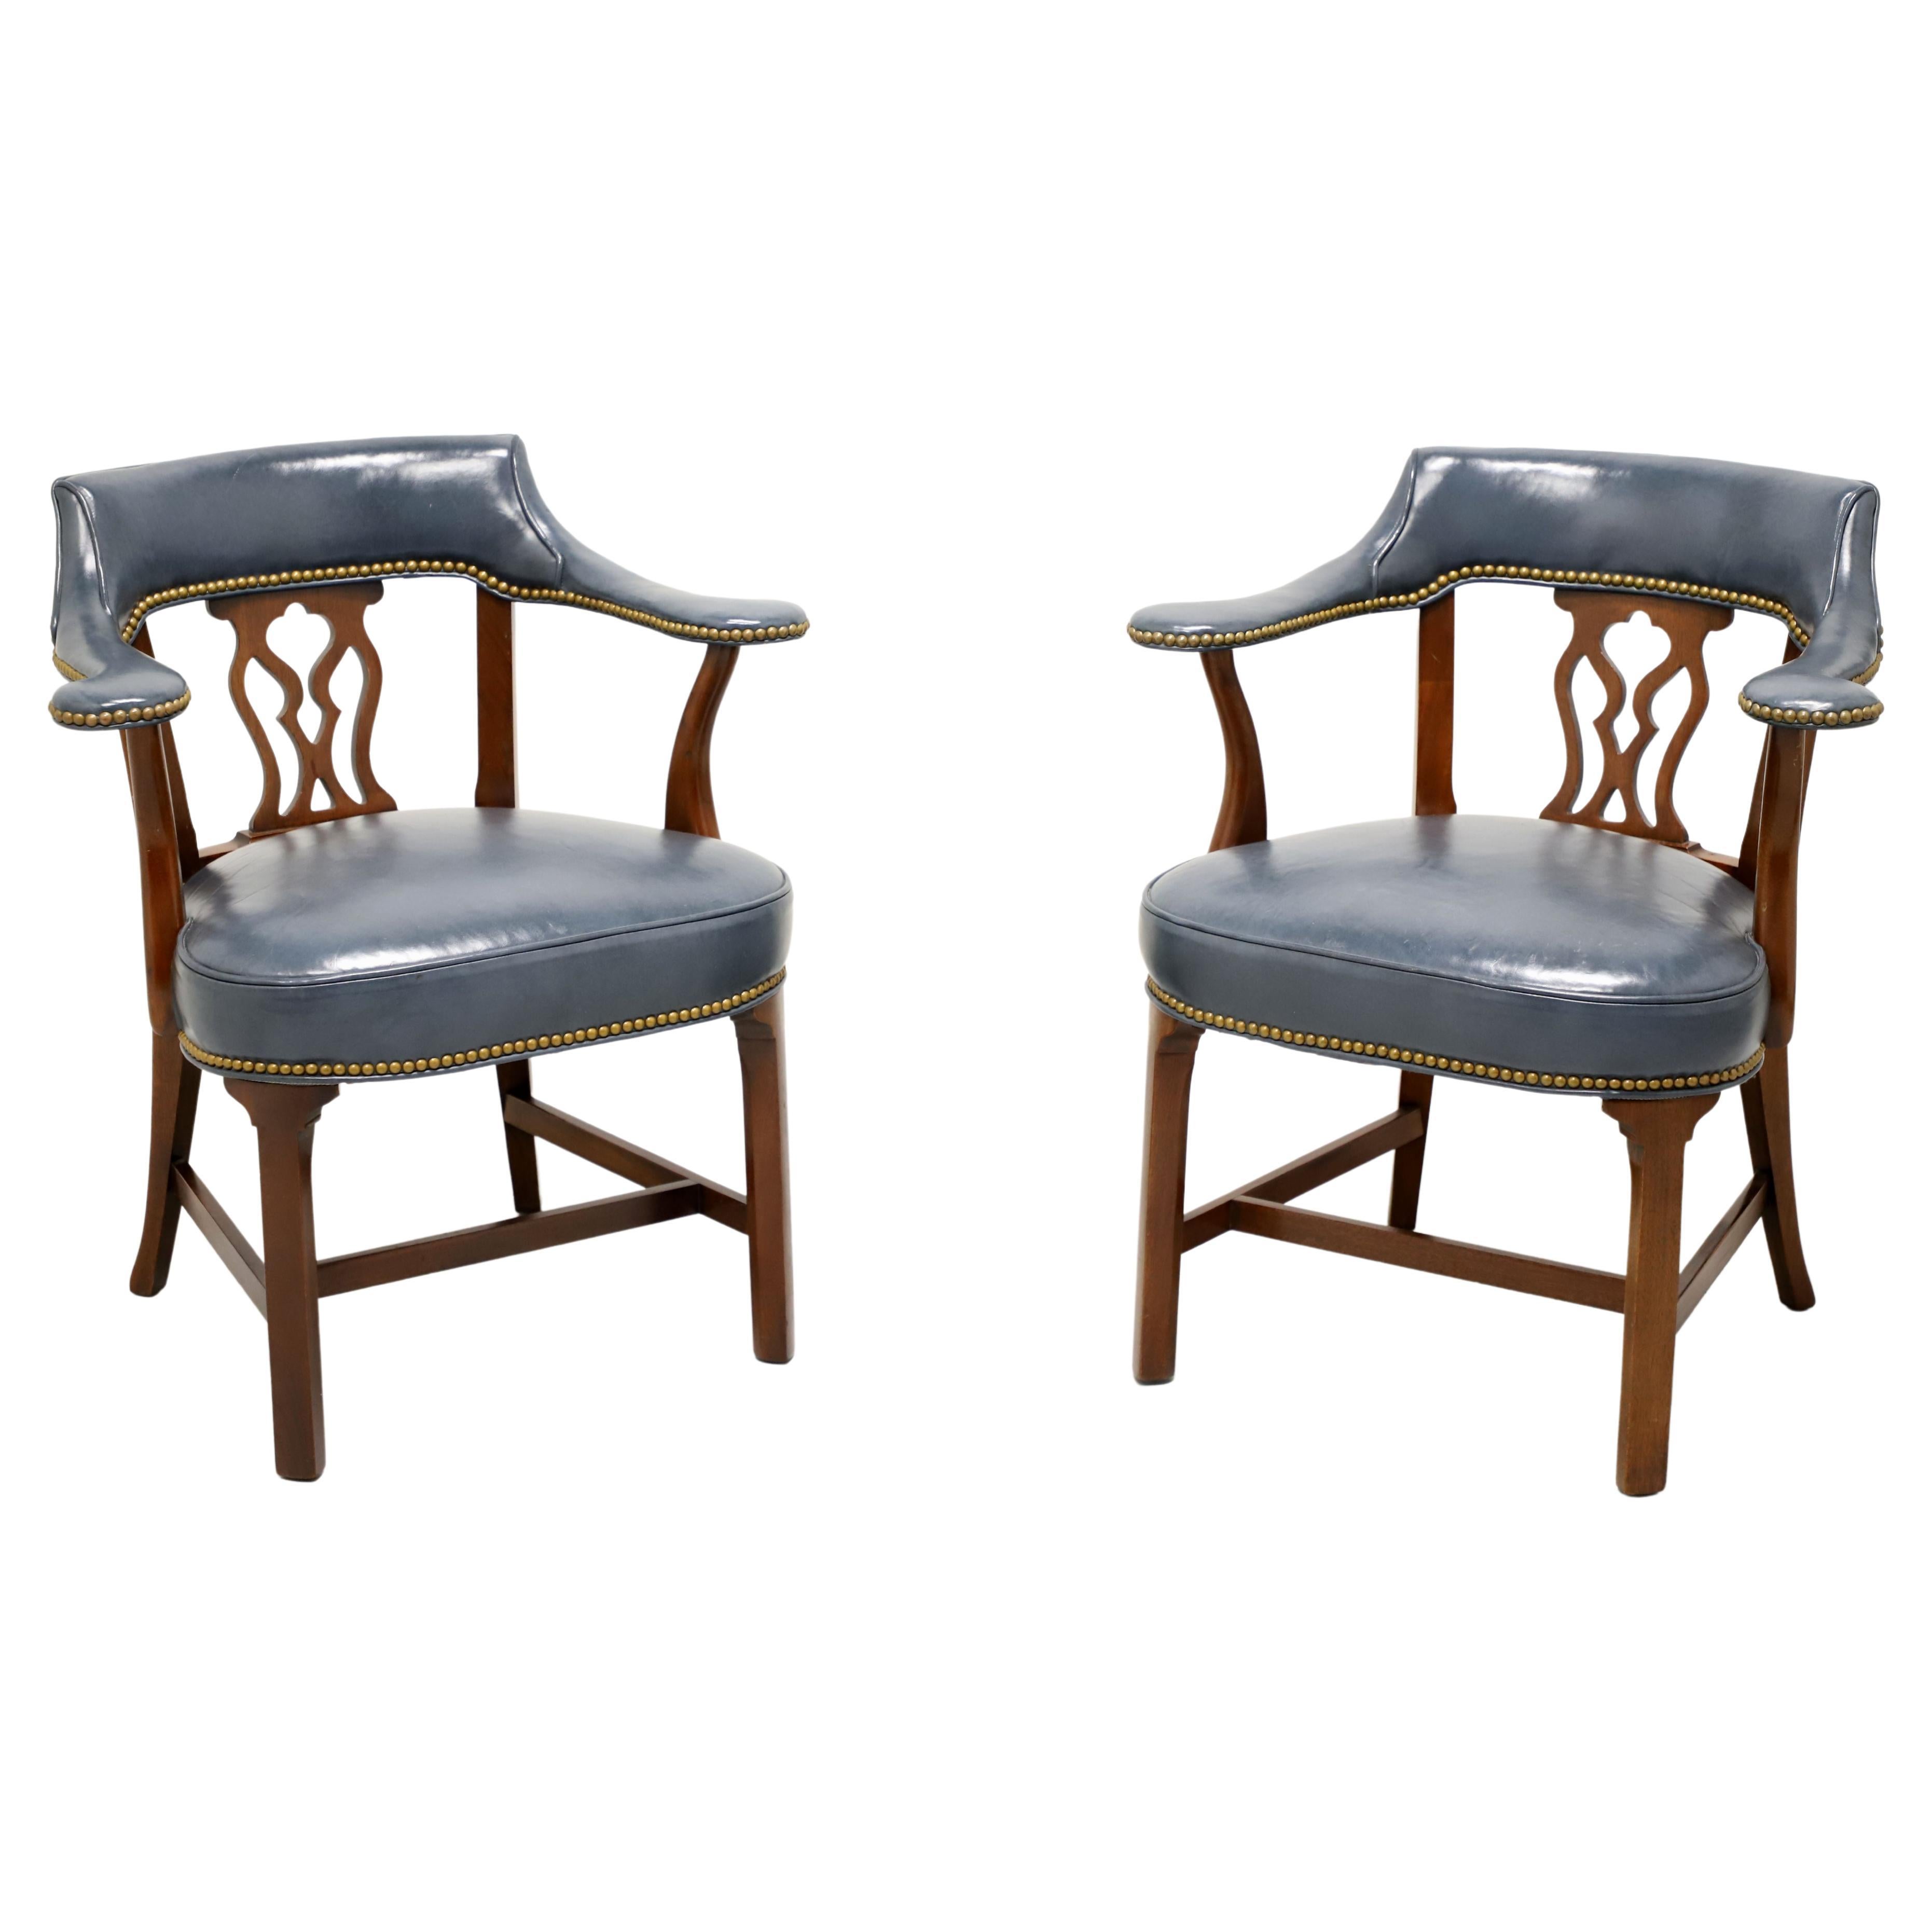 HICKORY CHAIR Mahogany Frame Blue Leather Armchairs - Pair